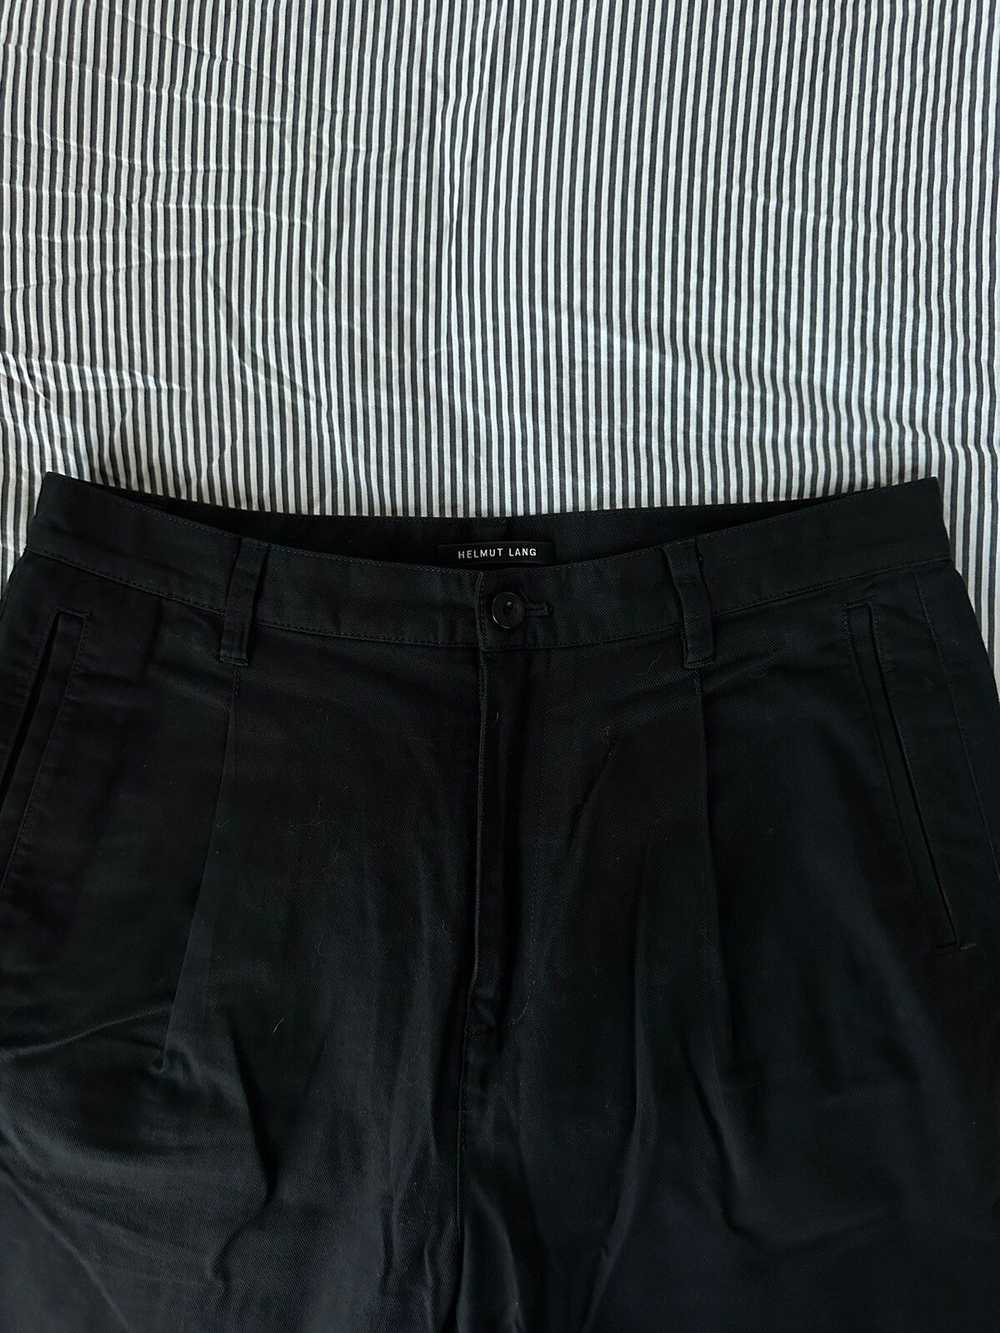 Helmut Lang Black Cropped Trousers - image 2